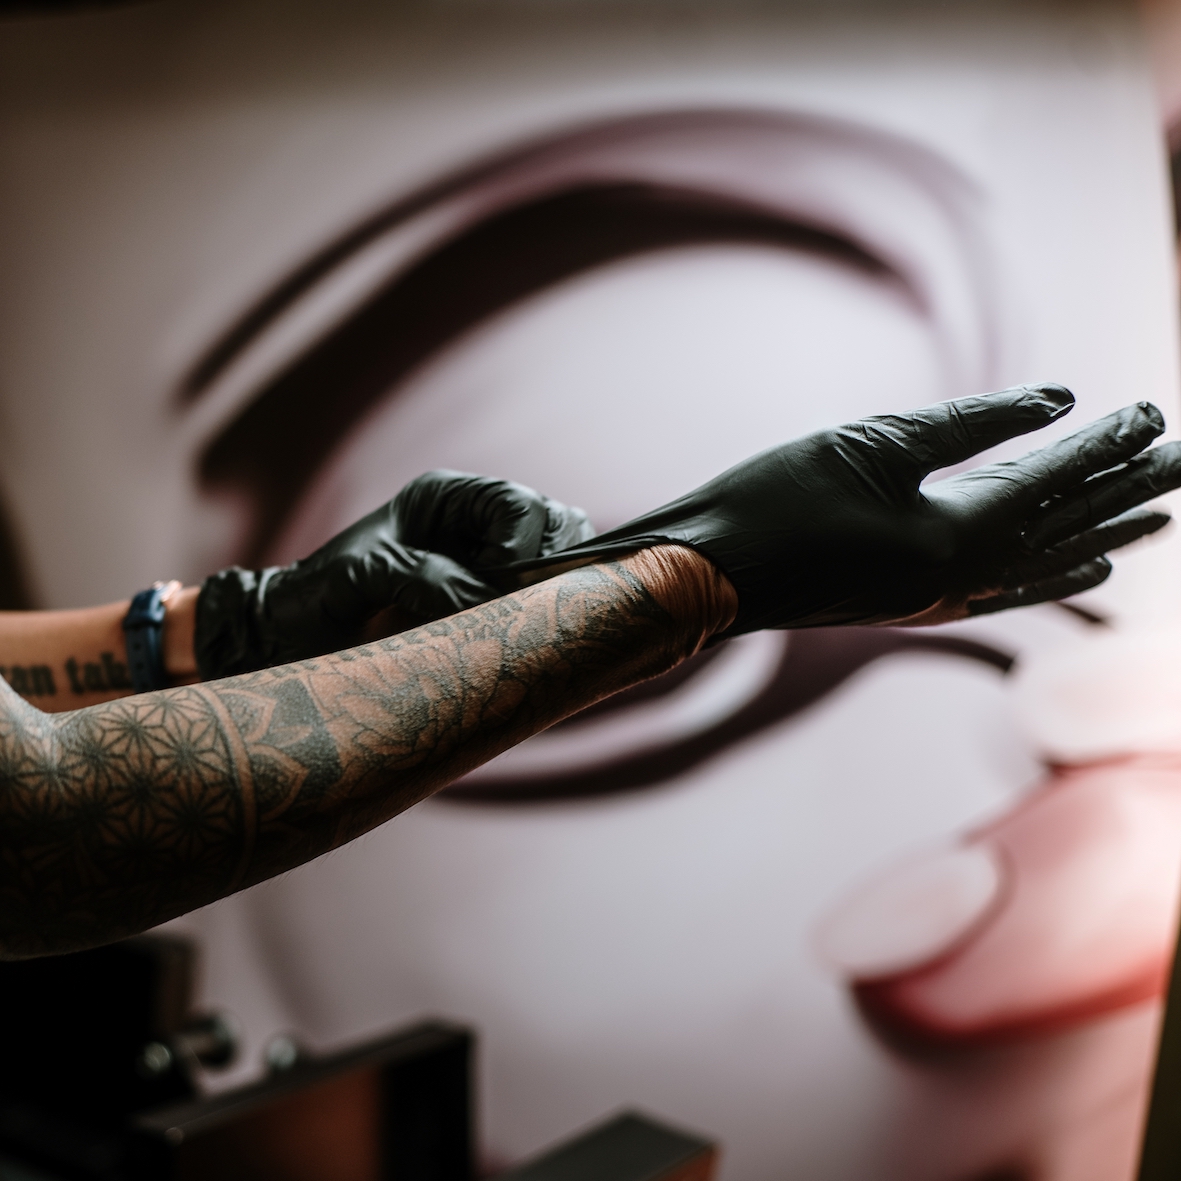 a tattoo artist preparing by putting disposable gloves on